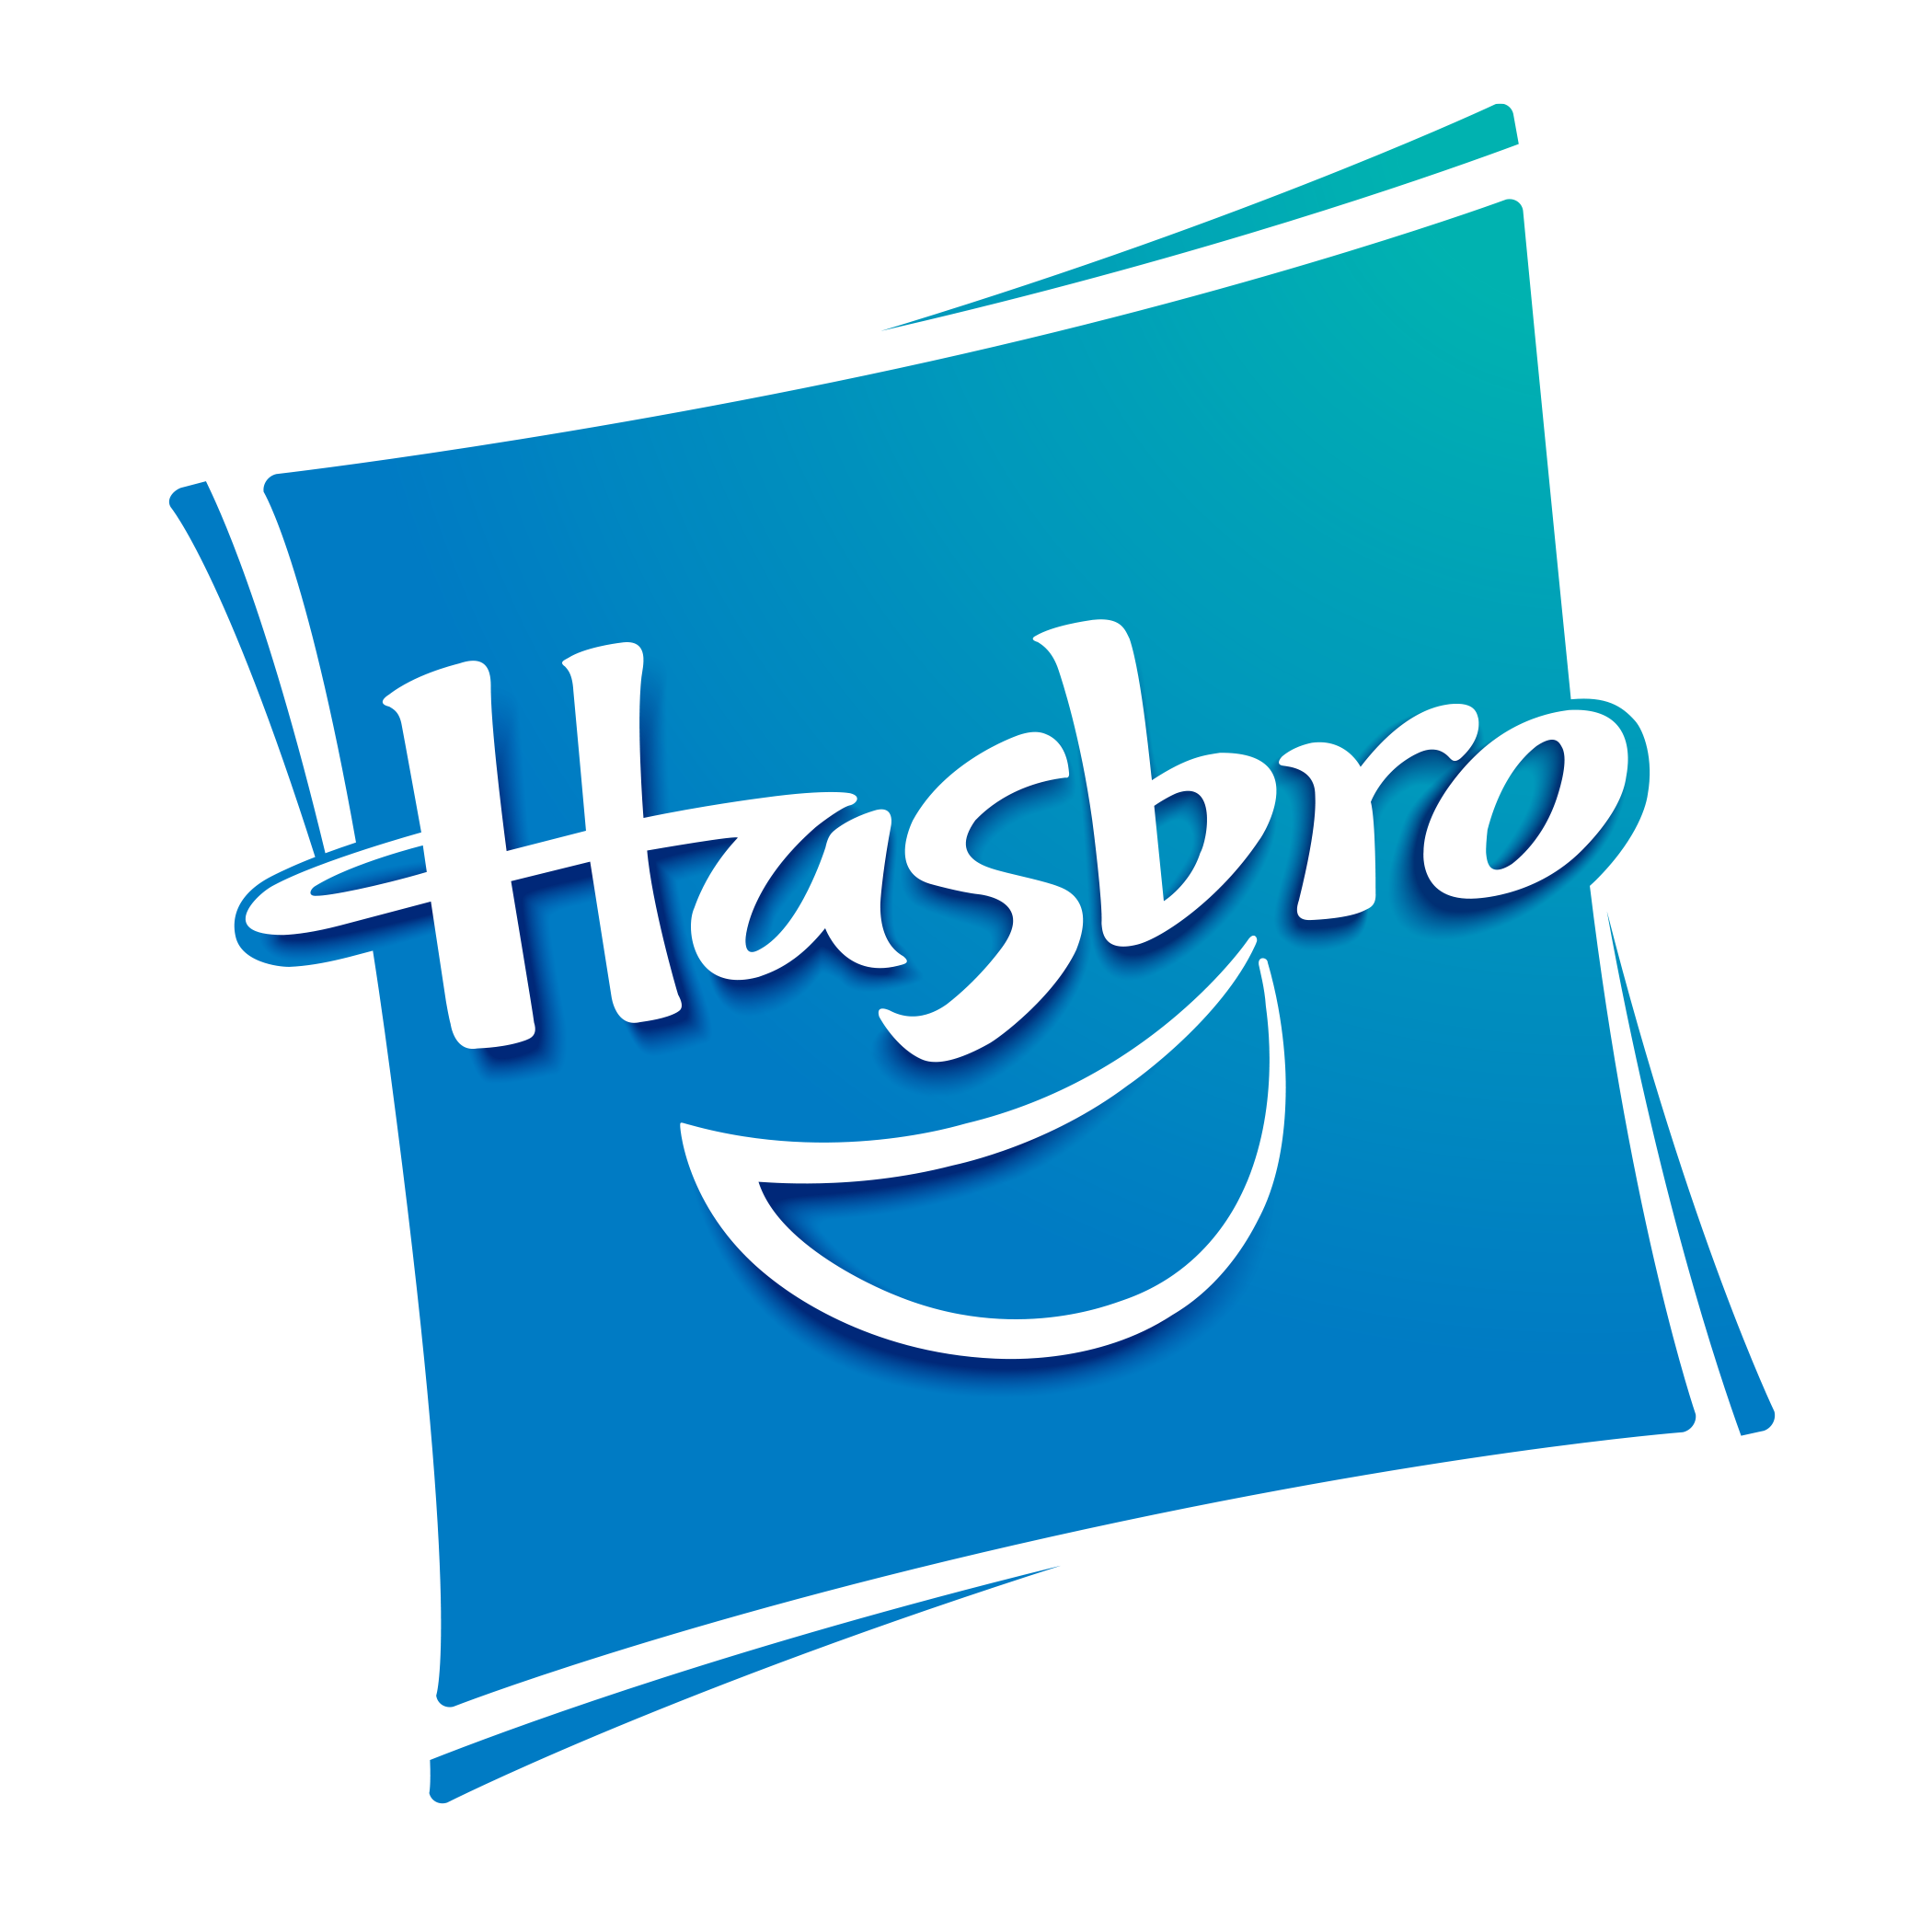 Hasbro Reports Strong 2020 Quarter 3 Earnings From Magic: The Gathering